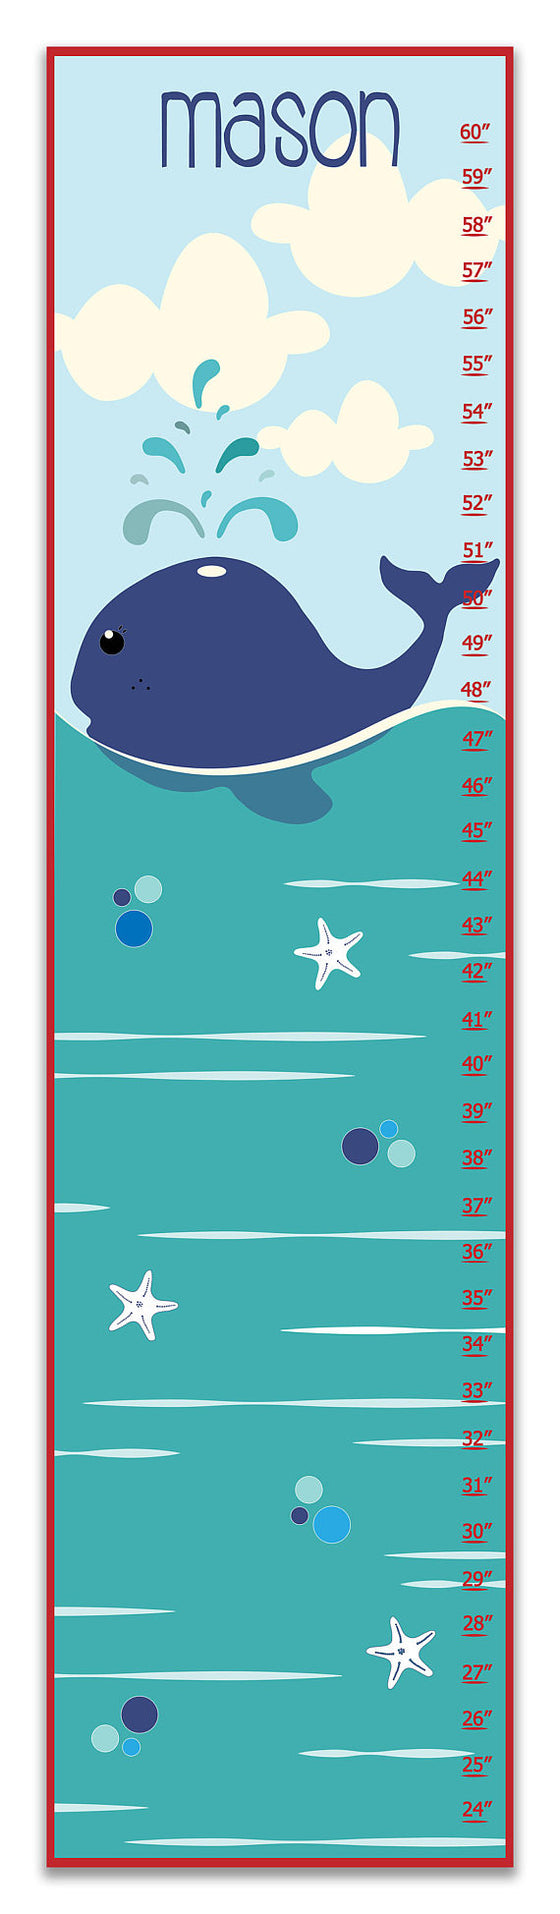 Whale Personalized Growth Chart - Gifts for Baby Boy - Nursery Decor